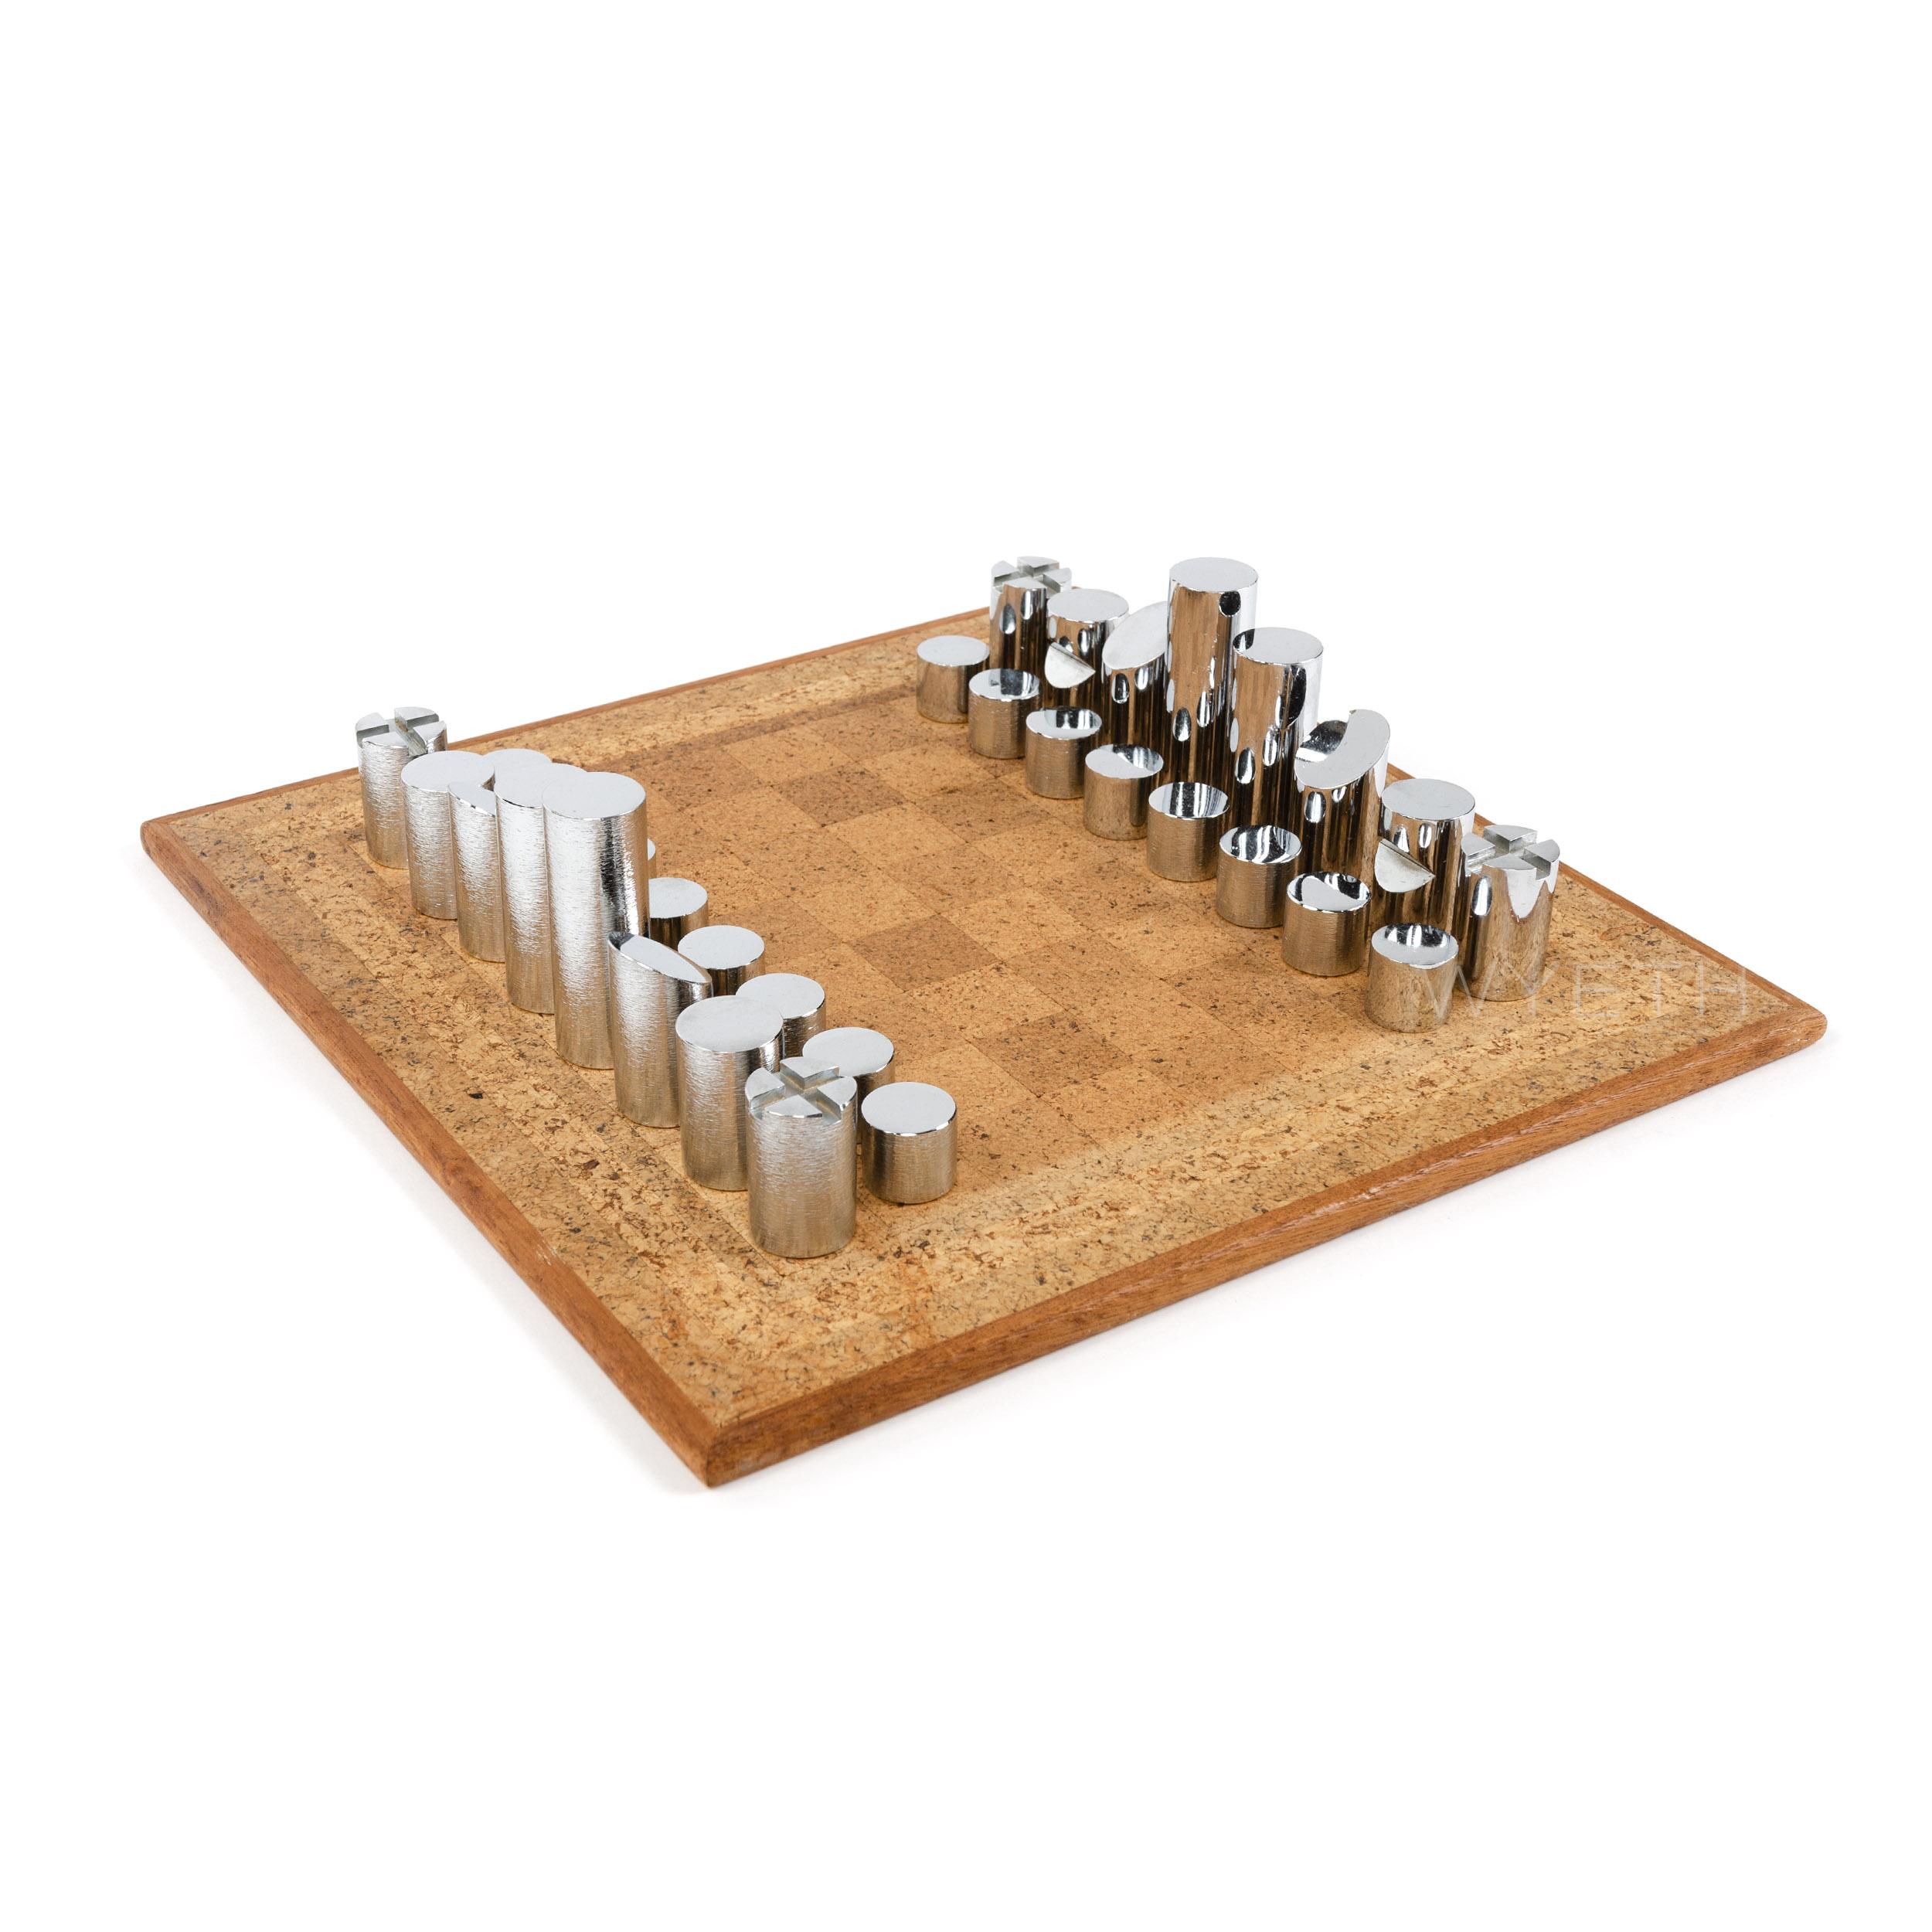 A modernist chess set in chrome-plated brass with a vintage cork board. The pieces are differentiated by having either a smooth polished finish or a subtle ripple texture.